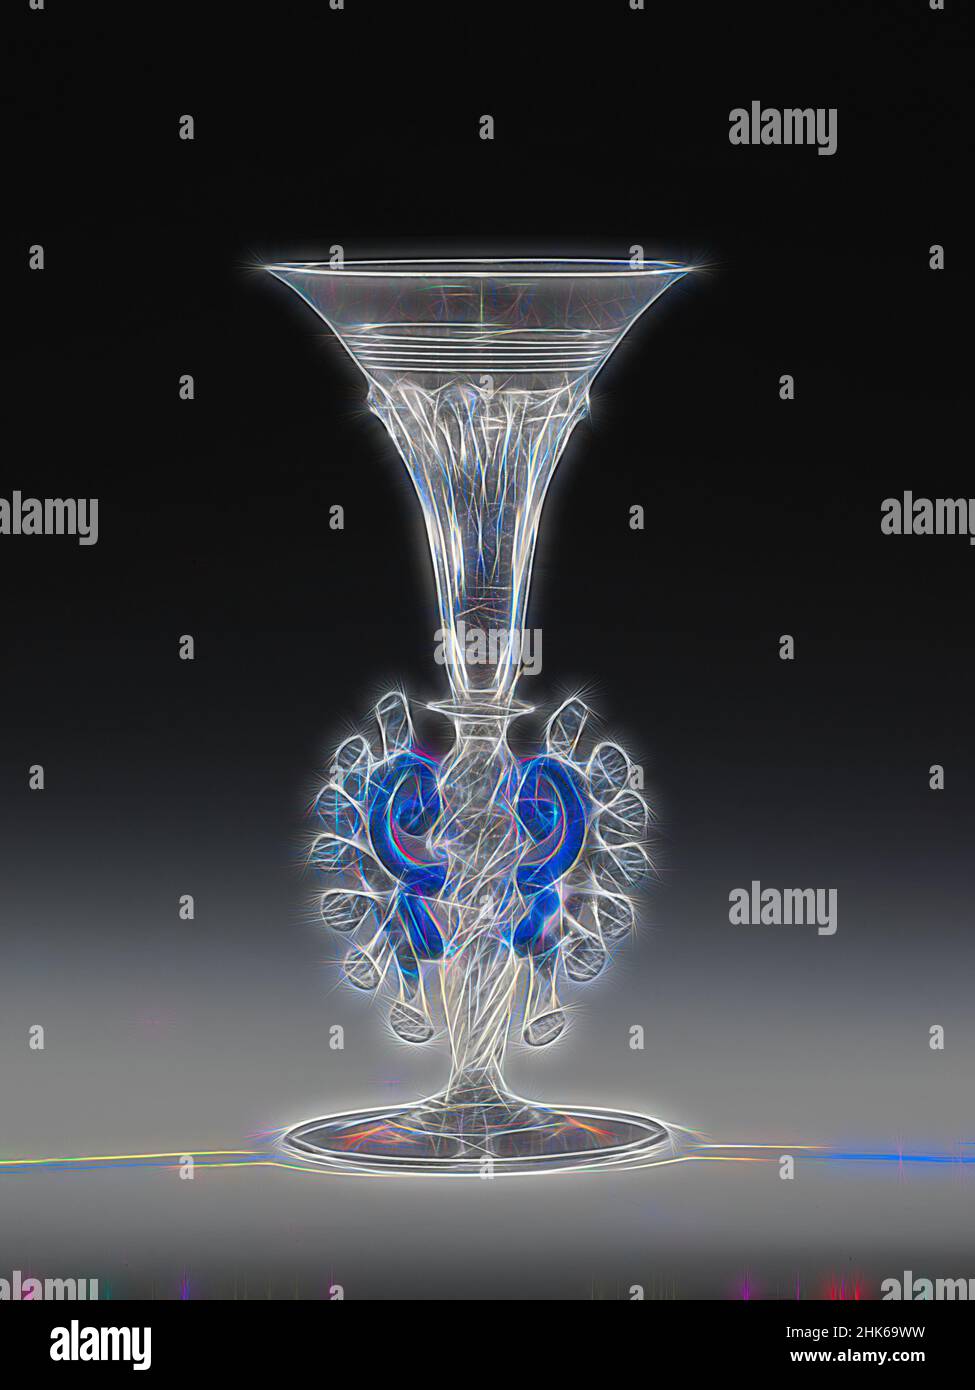 Inspired by Goblet, Dutch or Venetian, 697–1797, 17th century, Glass, Netherlands, Europe, Venice, Veneto, Republic of Venice (La Serenissima), Italy, Europe, Glassware, 7 3/8 x 3 5/8 in. (18.7 x 9.2 cm, Reimagined by Artotop. Classic art reinvented with a modern twist. Design of warm cheerful glowing of brightness and light ray radiance. Photography inspired by surrealism and futurism, embracing dynamic energy of modern technology, movement, speed and revolutionize culture Stock Photo